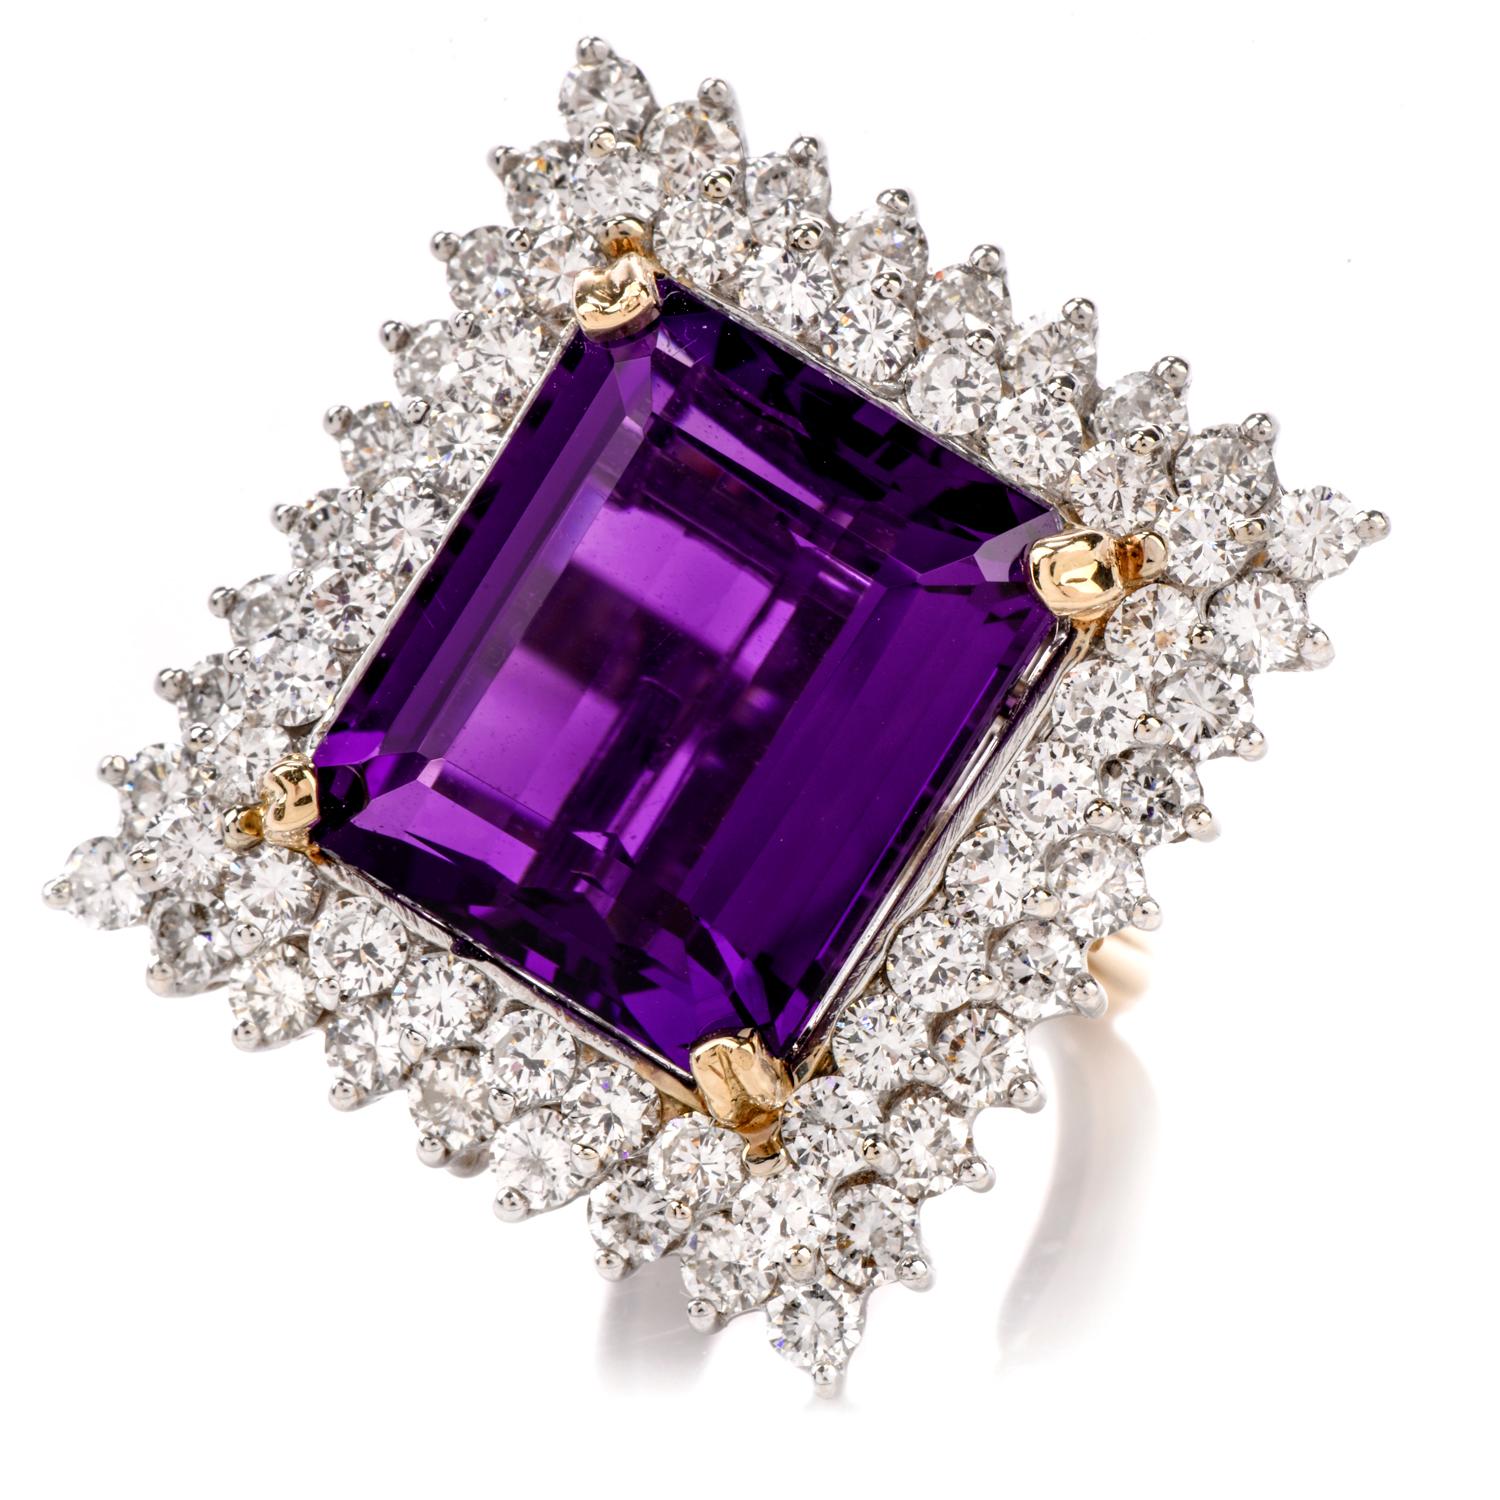 Add multiple pieces to your jewelry wardrobe with this versatile, 

Amethyst and Diamond Pendant and Cocktail ring combination.

Boasting the color and as a focus on the piece is a large

rectangular shaped Amethyst measuring appx. 17.57 x 15.07 x